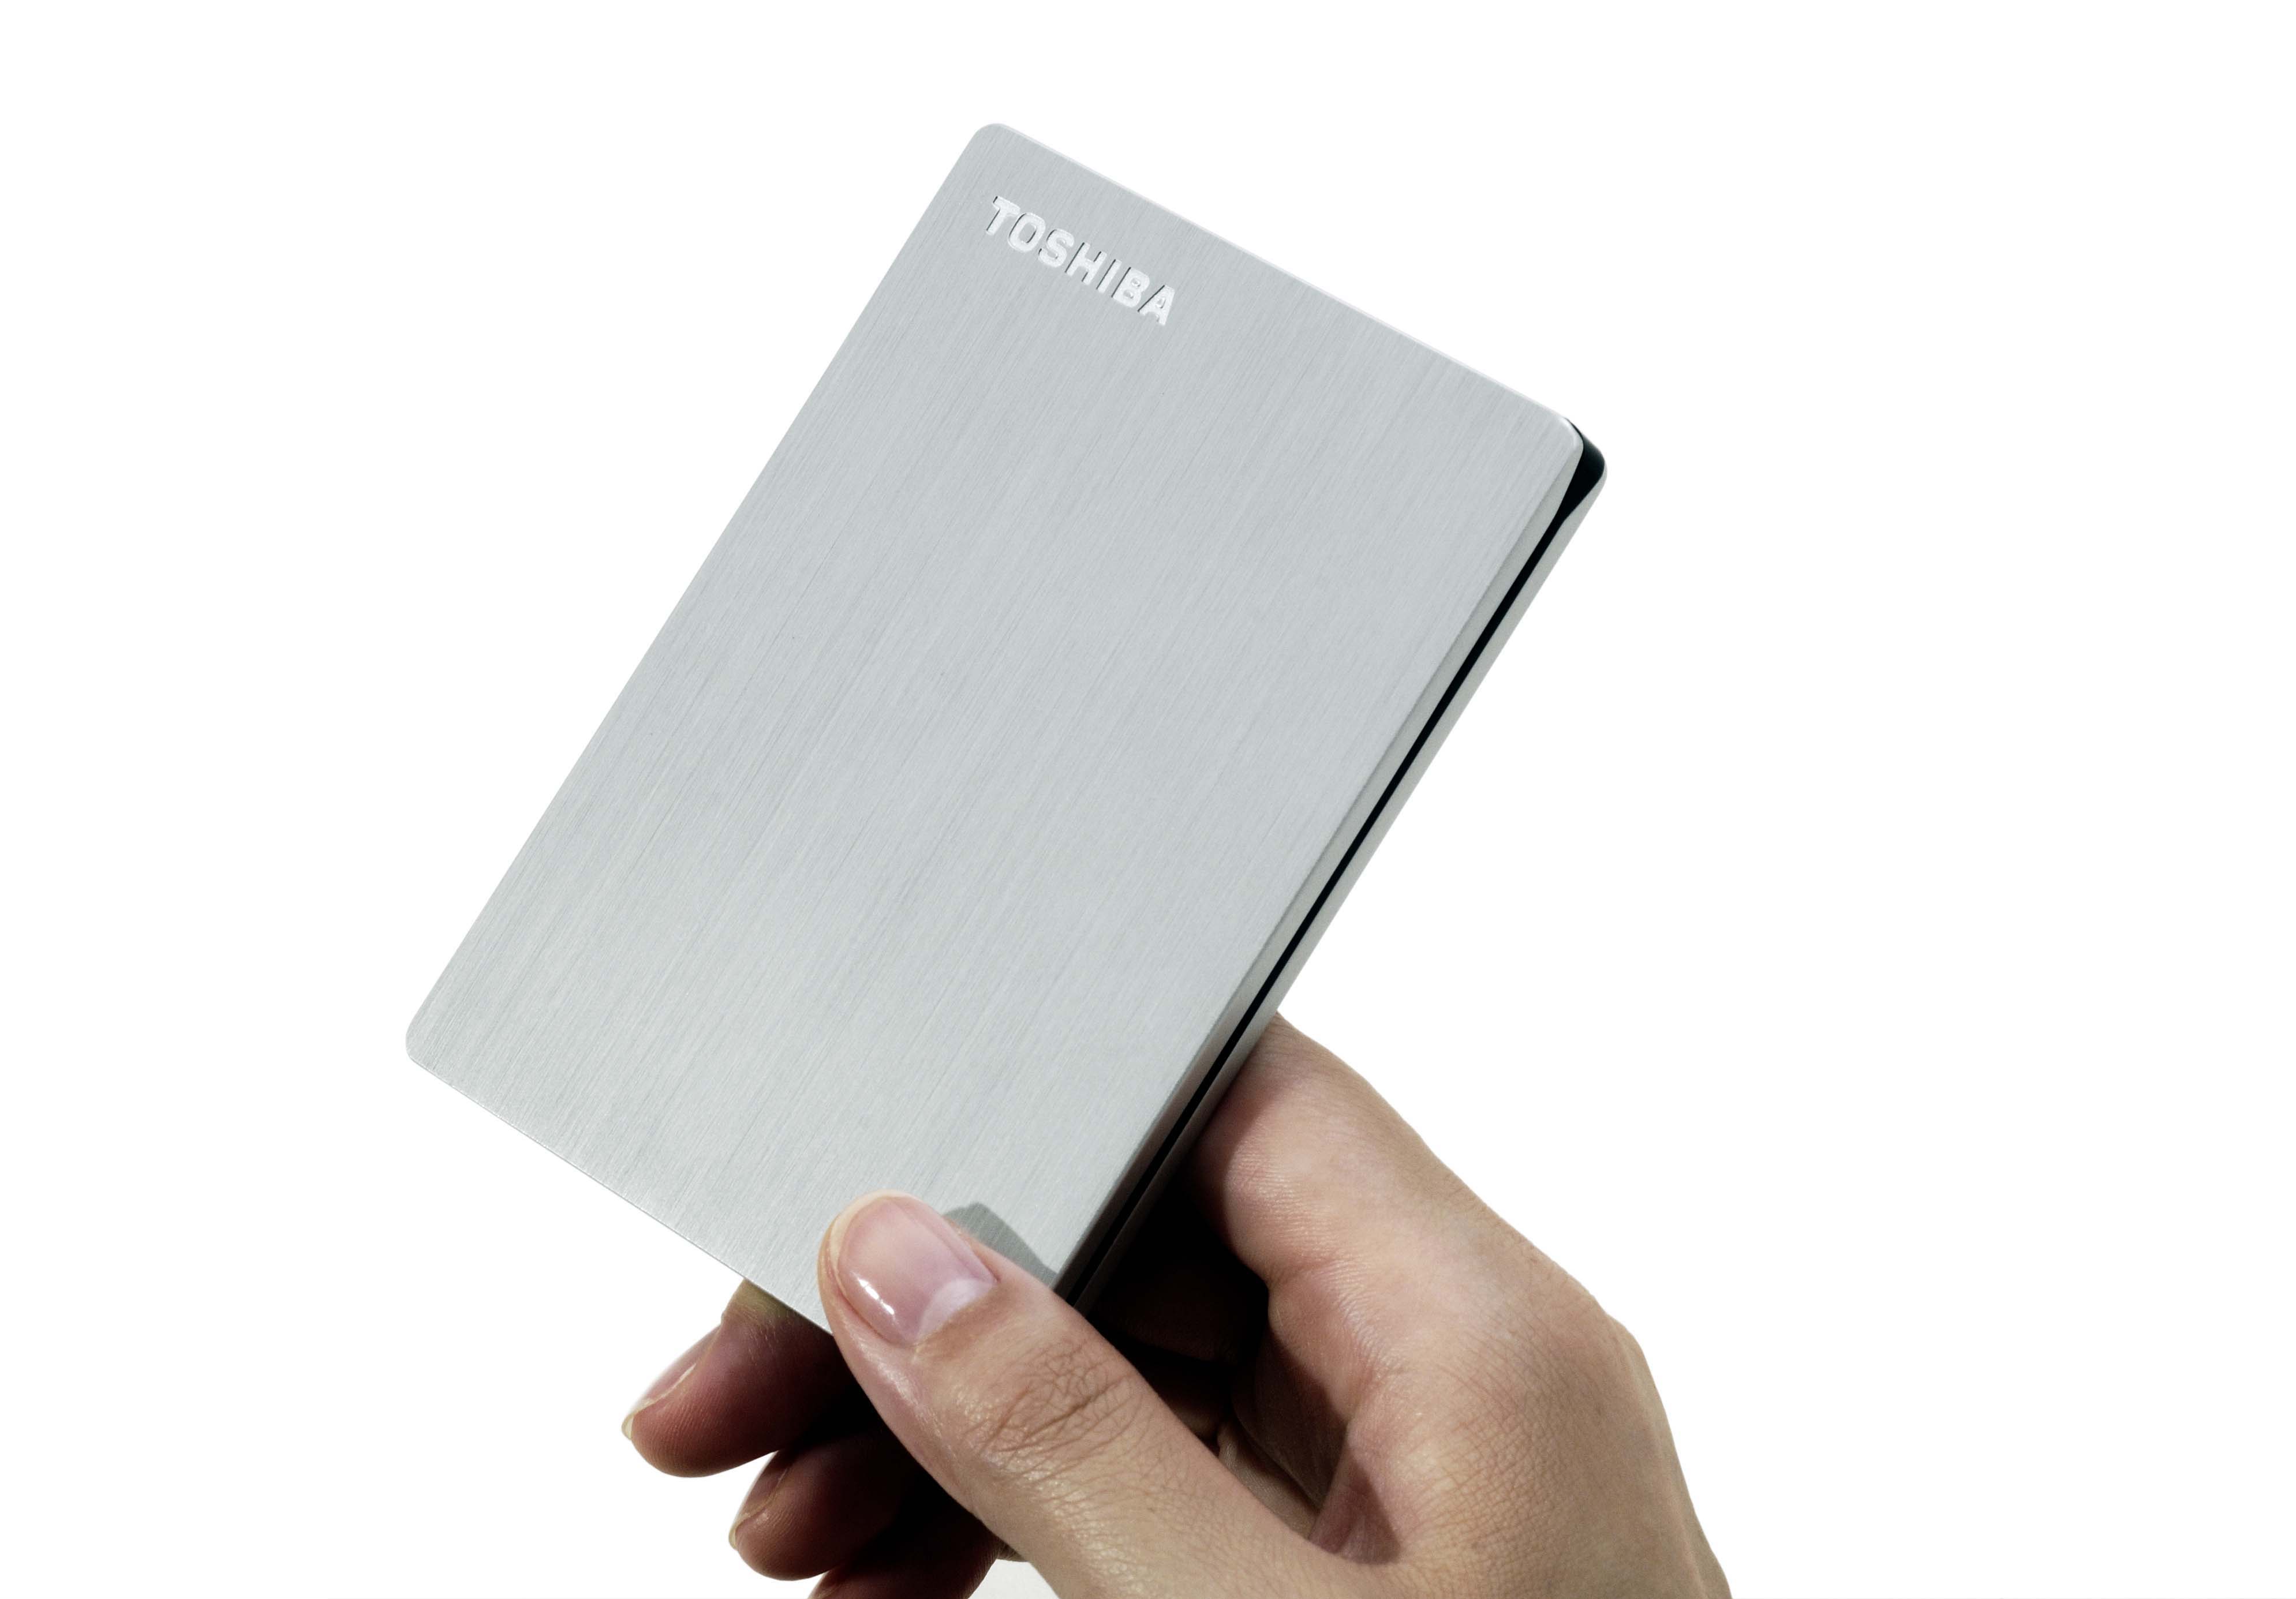 Toshiba New External Drive: How Small Can It Go?_1